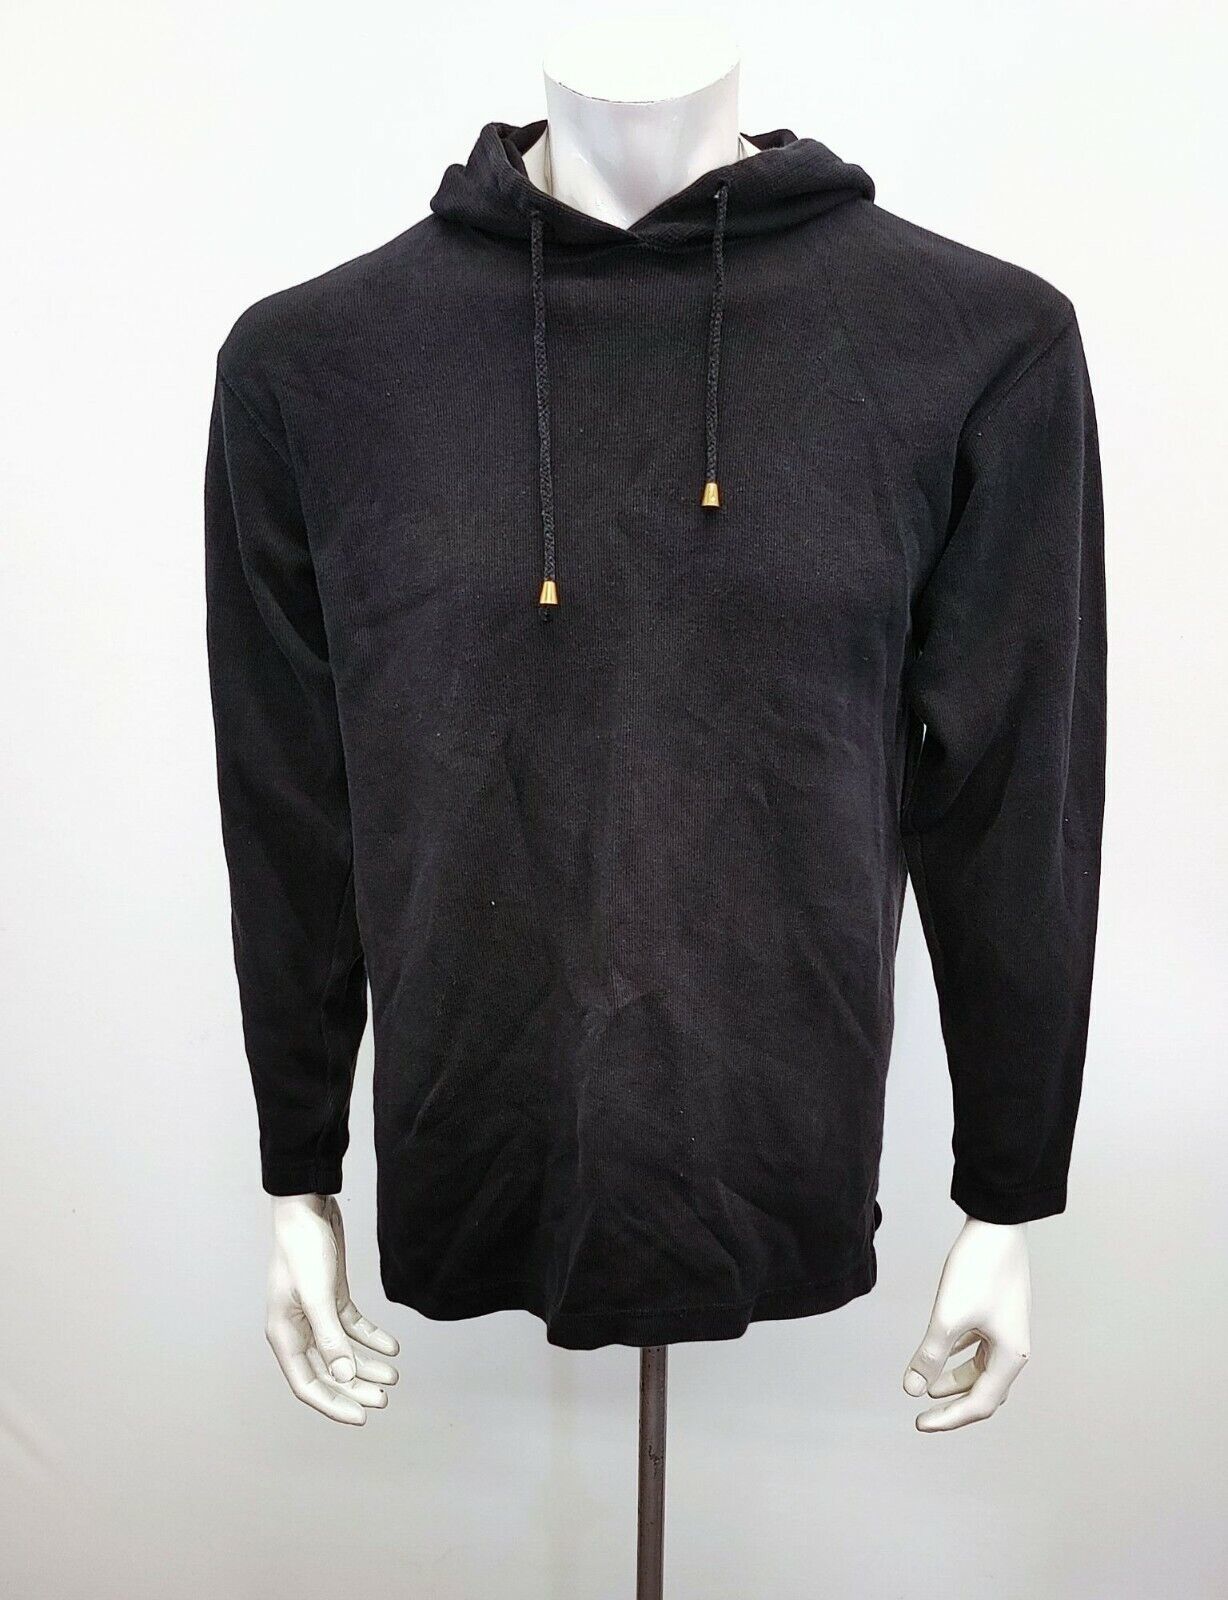 Primary image for Blue Rodeo Men's Ribbed Hoodie Size Small Black Cotton Long Sleeve